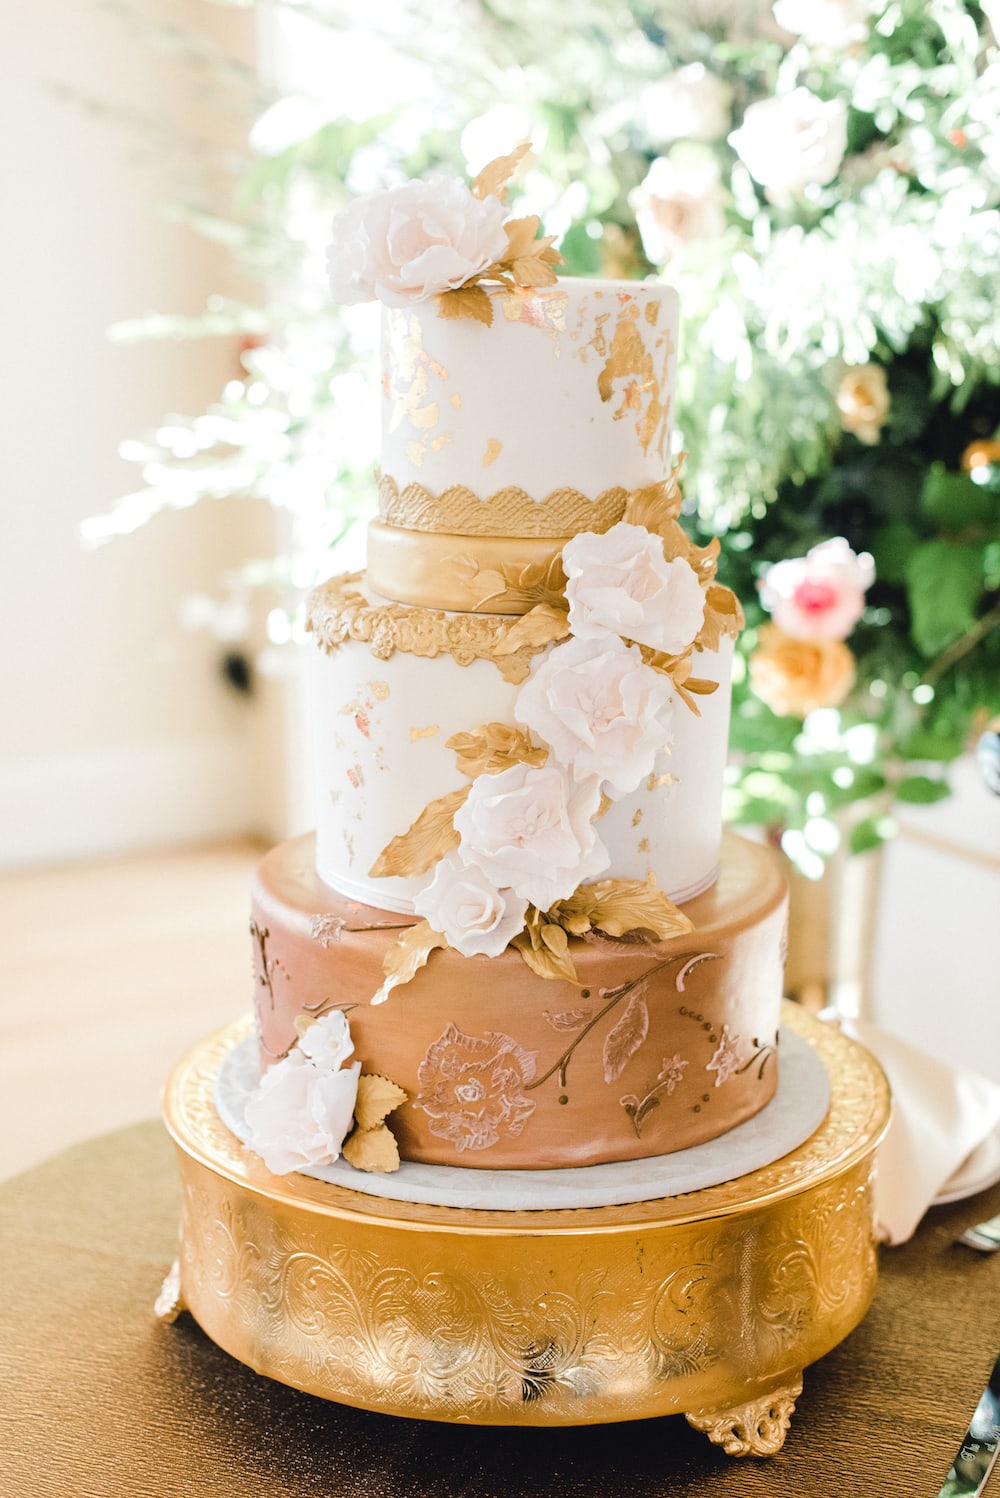 Three-tier wedding cake with gold and white theme and floral decor, taken by Marcela Diaz Photography